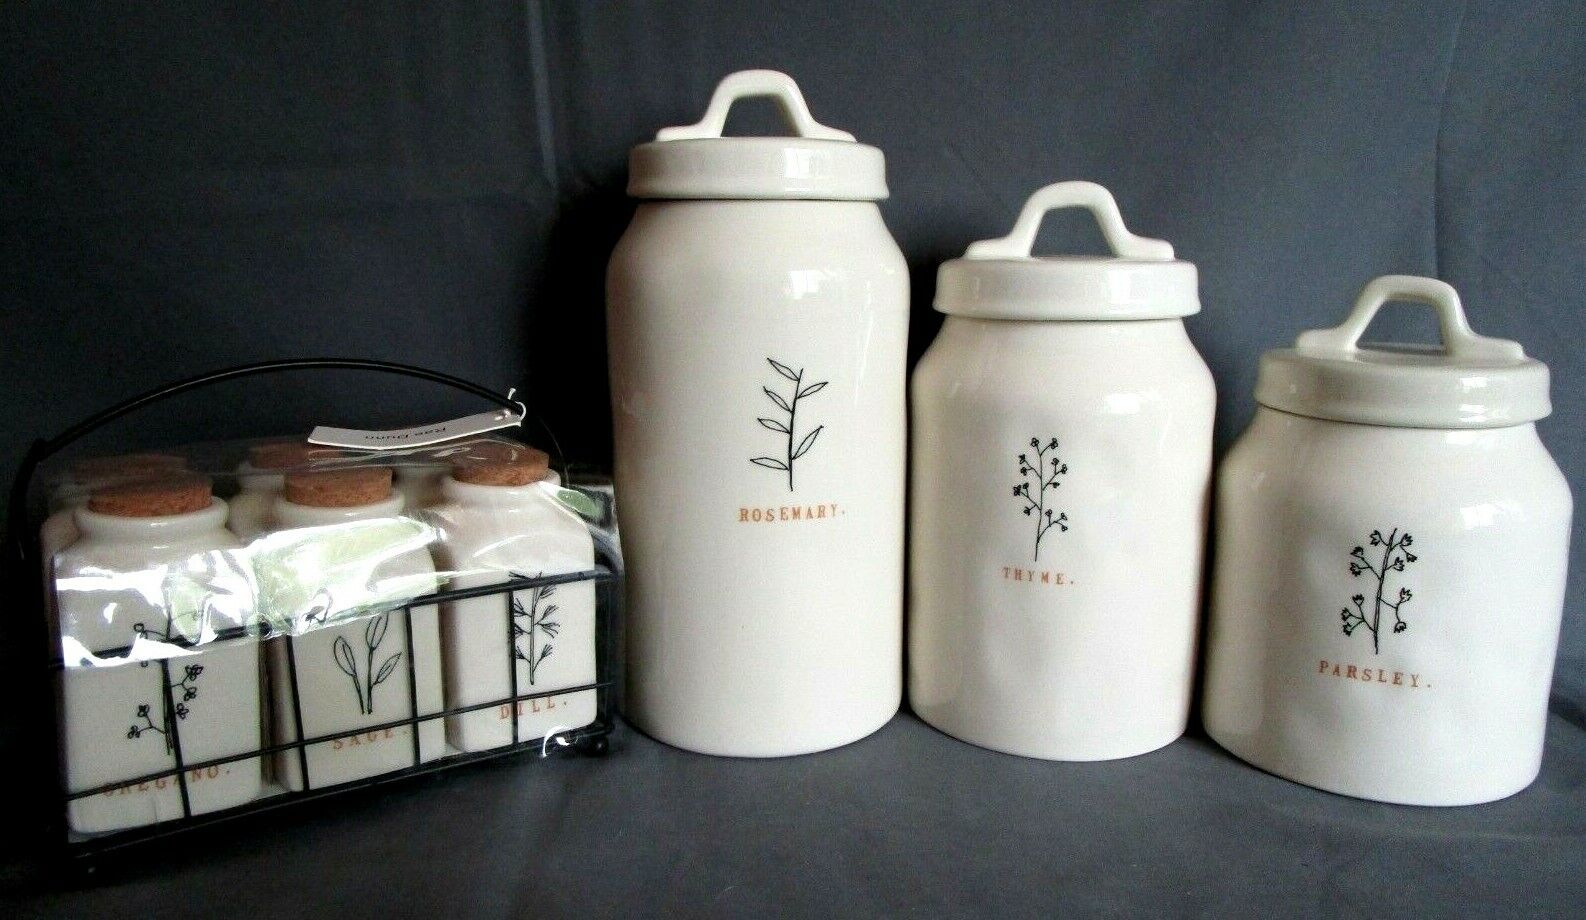 NEW Rae Dunn ROSEMARY THYME PARSLEY Canisters Containers Set & Spice Jars W Rack